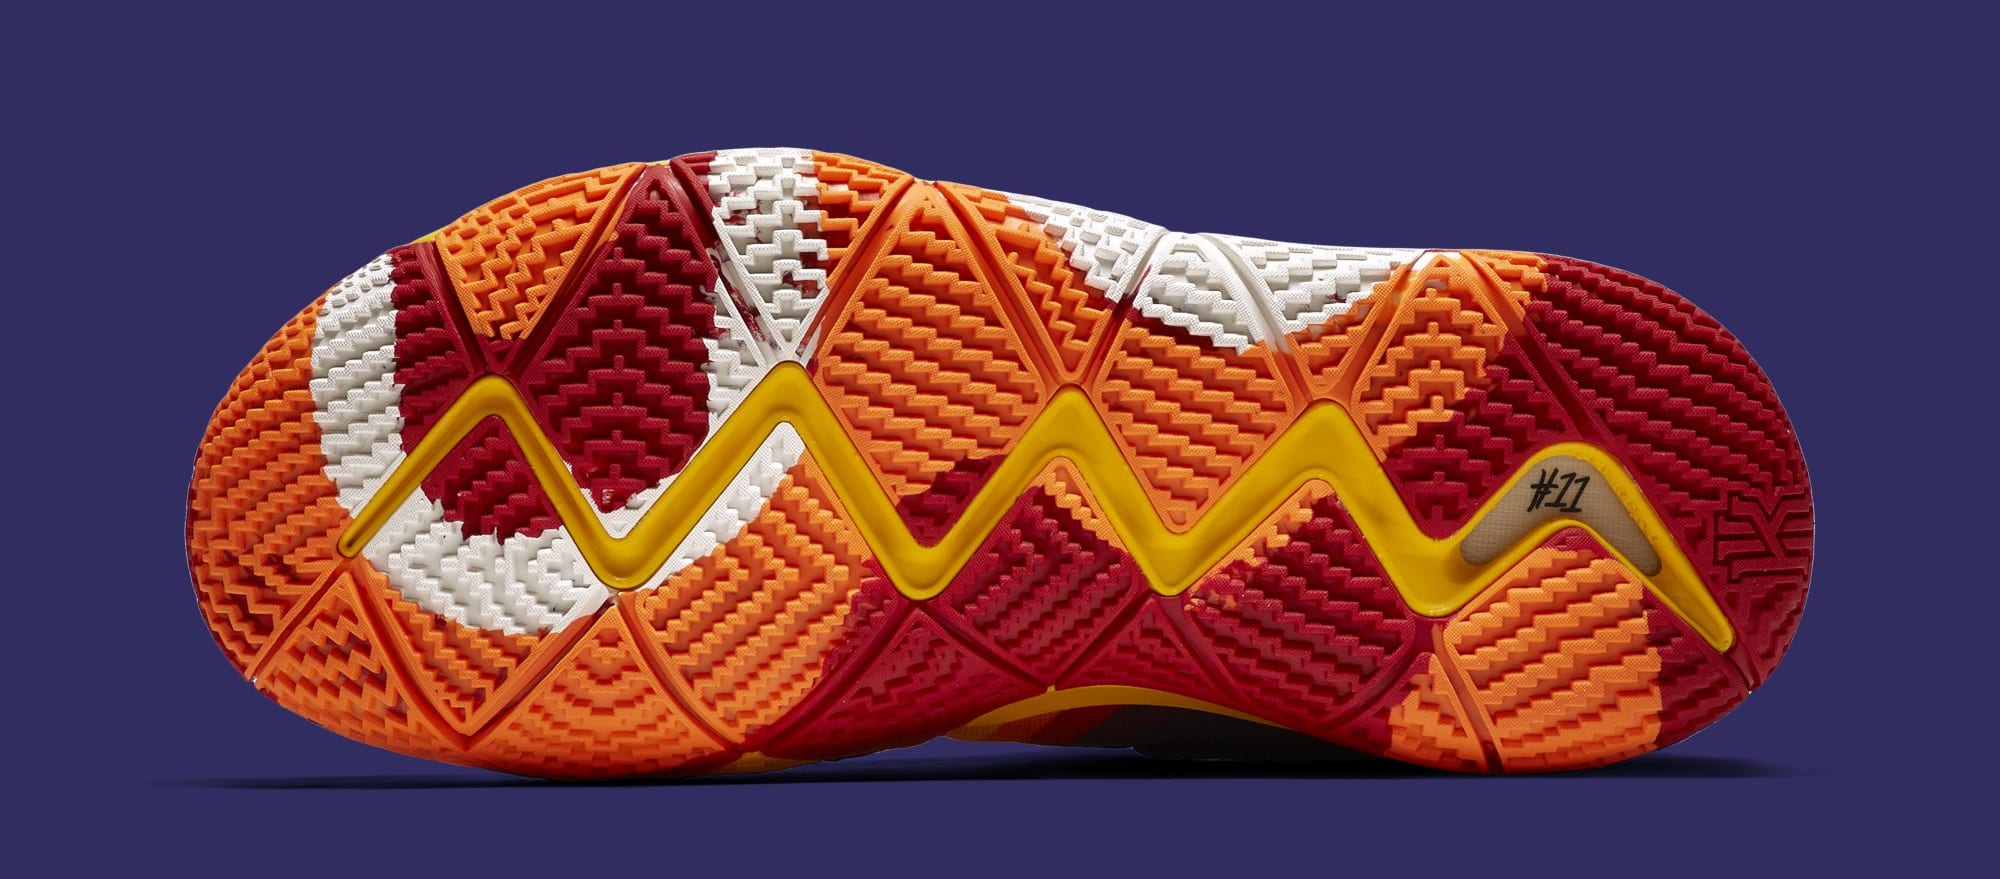 Nike Kyrie 4 EP &#x27;Yellow/Multicolor&#x27; 943807-700 (Sole)